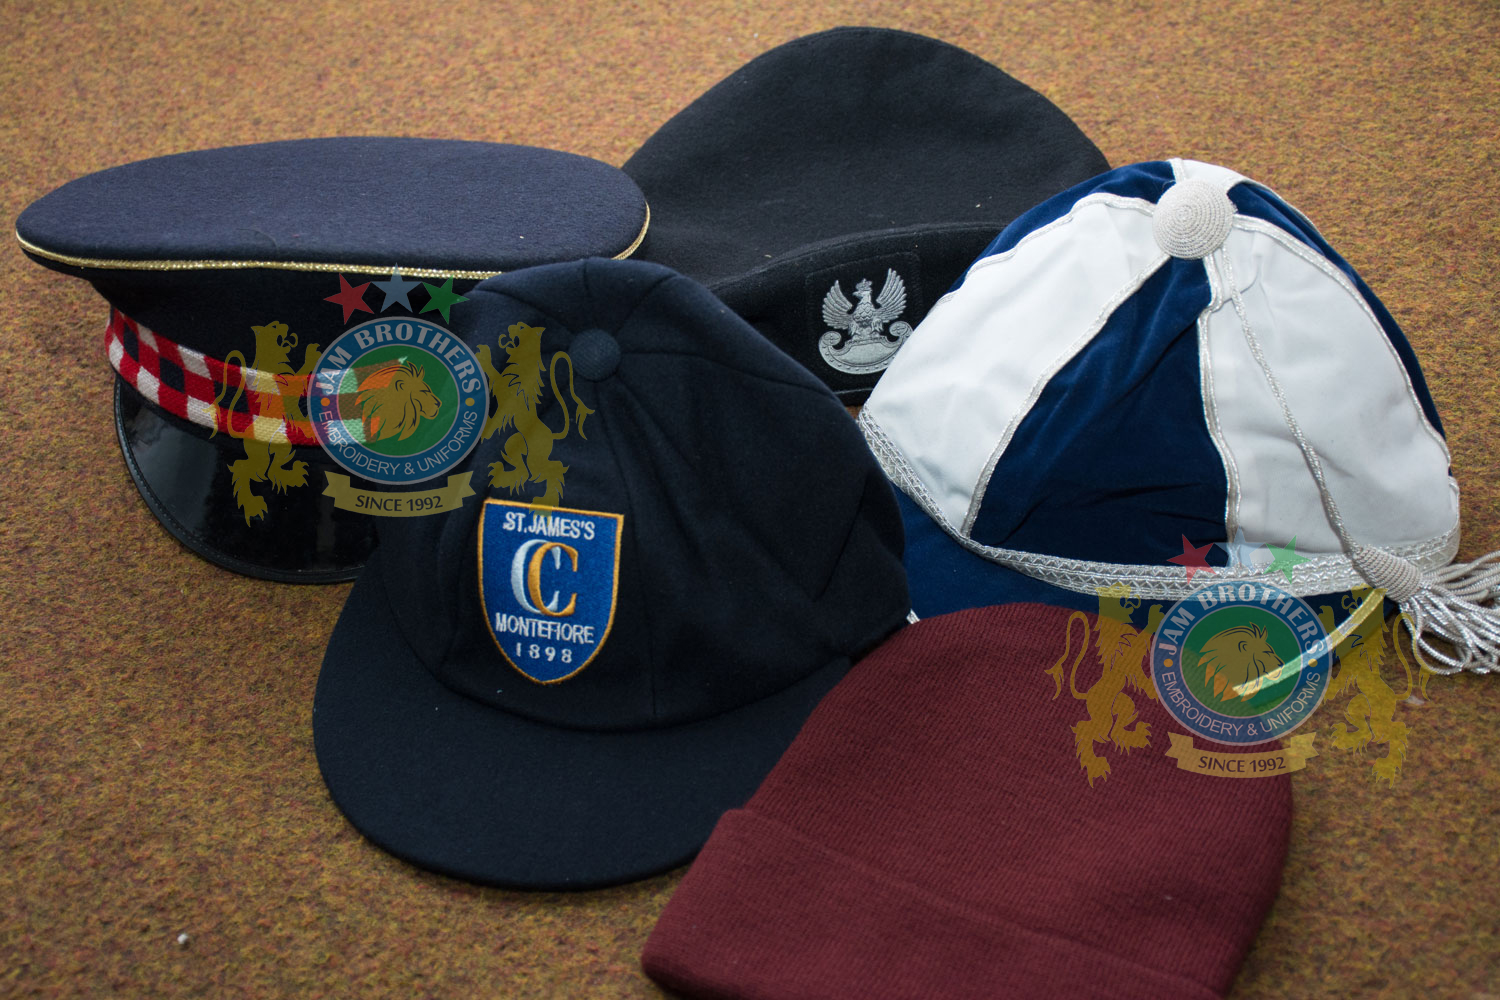 Caps Hats Officer Caps Berets Military Honor Cap Sports Cap Beanie Officer hat officer cap Lanyard Sword Knot Aiguillettes Braid Rope Ribbon Accessories Military Uniform Accouterments Lace Trimming Braid Gold White Silver Blue Weave Weaving Uniforms Accouterments Tailor Belts Leather Ceremonial Combat Cadet Parade Belts #Hand Embroidery #BullionEmbroidery #TradeBadges #MessDress #Badges #Ranks #Regiment #Parade #Ceremonial #Cord #Textile #ArmedForces #BritishArmy #Army #Aiguillette #Military #MilitaryUniforms #Militaria #Insignia #Headwear #Caps #OfficerCaps #UniformCaps #PeakCaps #DressCaps #MilitaryCaps #RailCap #Berets #Glengarry #RoyalNavy #RoyalMarine #RoyalAirForce #RAF #Infantry #Armor #EME #Battalion #Medals #Ribbons #Braid #Lace #Uniforms #UniformSupplie #Police #Security #Buckles #Guards #Accoutrement #Badge #Patch #Machine #MachineEmbroidery #HandEmbroidery #Bullion #BullionBadges #BullionEmbroidery #WovenBadges #Woven # Emblems #Regiment #Regimental #OfficerCaps #PeakCaps #Soldier #Helmets #Covers #HelmetCovers #Armlets #Sliders #Epaulettes #Webbing #Chevron #Officer #ShoulderBoards #Gorgets #Tassel #Sash #Hand #HandSewn #Aviation #AviationClothing #Crest #FamilyCrest #CoatofArms #EmbroideredPillows #Cords #Aiguillettes #CapCords #ChinCord #DressCord #SwordKnot #Tassels #WhistleCord #Lanyard #Knots #Banners #ClanBadges #Peaks #Visor #Wings #CapBadges #Pennants #HonorCaps #OfficerCaps #SportsCap #Masonic #Aprons #MasonicAprons #Collars #MasonicCollars #Gloves #MasonicGloves #MasonicPatches #Patches #Regalia #MasonicRegalia #Freemason #Braid #Chevron #Cuffs #Fringes #Sashes #HeadGear #FieldGear #England #USA #Poland #ArmedForces #Schools #Colleges #University #Sialkot #Pakistan Sialkot Pakistan PeakCaps OfficerCaps ShoulderRanks BullionBadges UniformAccessories MilitaryUniforms DressCap TradeBadge RankMarking WireBadges Army Airforce Navy Police